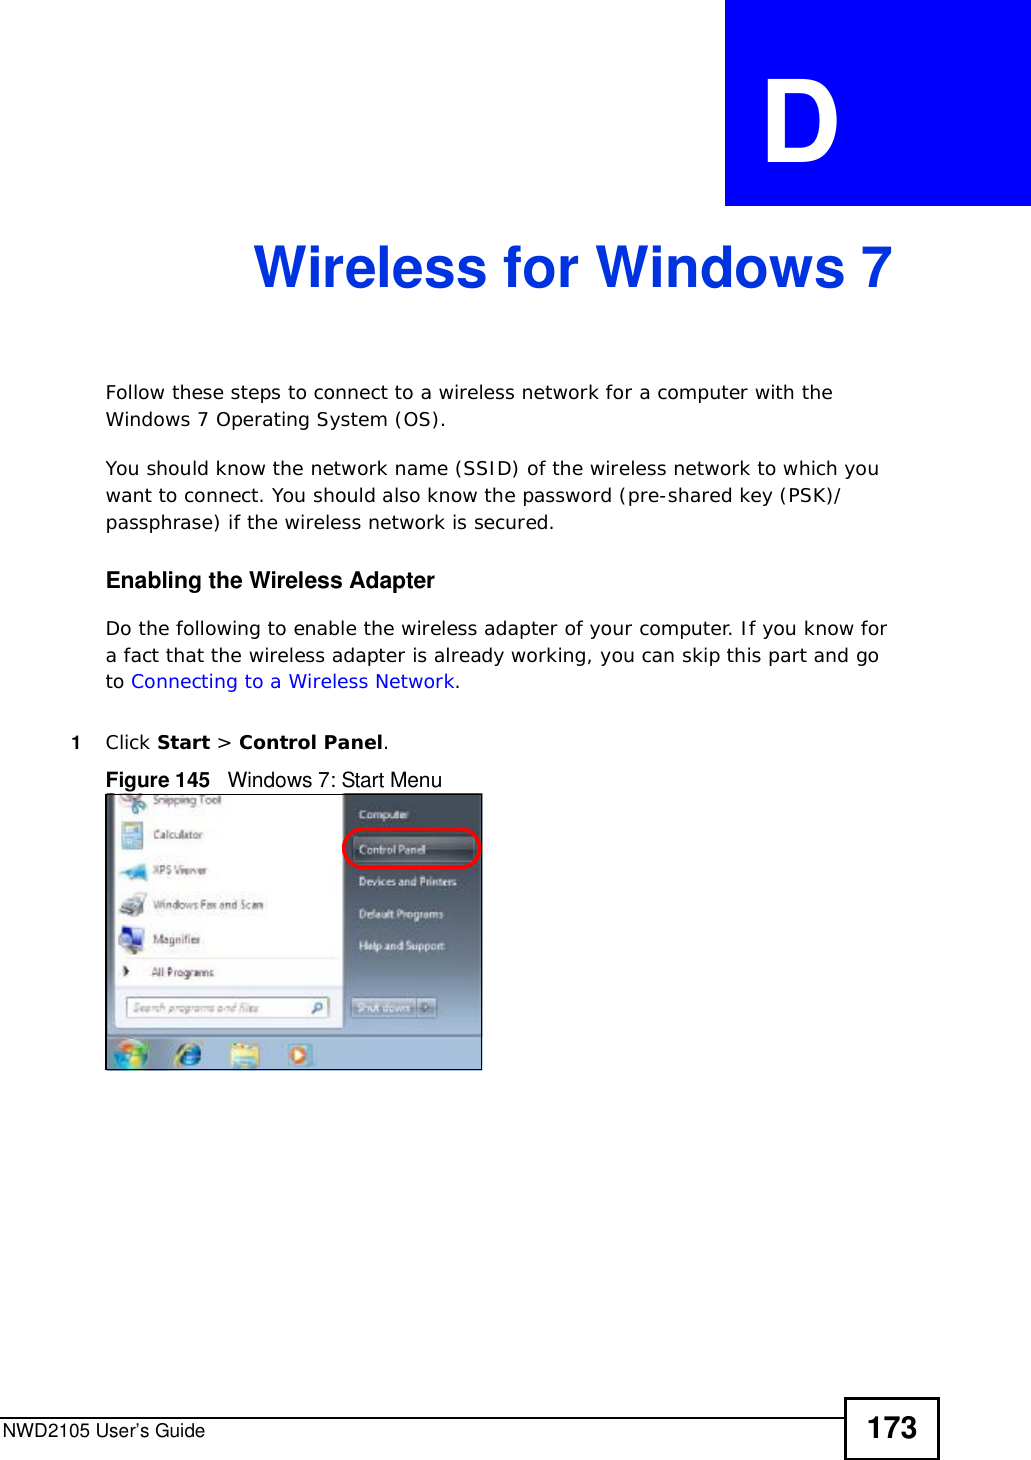 NWD2105 User’s Guide 173APPENDIX  D Wireless for Windows 7Follow these steps to connect to a wireless network for a computer with the Windows 7 Operating System (OS).You should know the network name (SSID) of the wireless network to which you want to connect. You should also know the password (pre-shared key (PSK)/passphrase) if the wireless network is secured. Enabling the Wireless AdapterDo the following to enable the wireless adapter of your computer. If you know for a fact that the wireless adapter is already working, you can skip this part and go to Connecting to a Wireless Network.1Click Start &gt; Control Panel.Figure 145   Windows 7: Start Menu